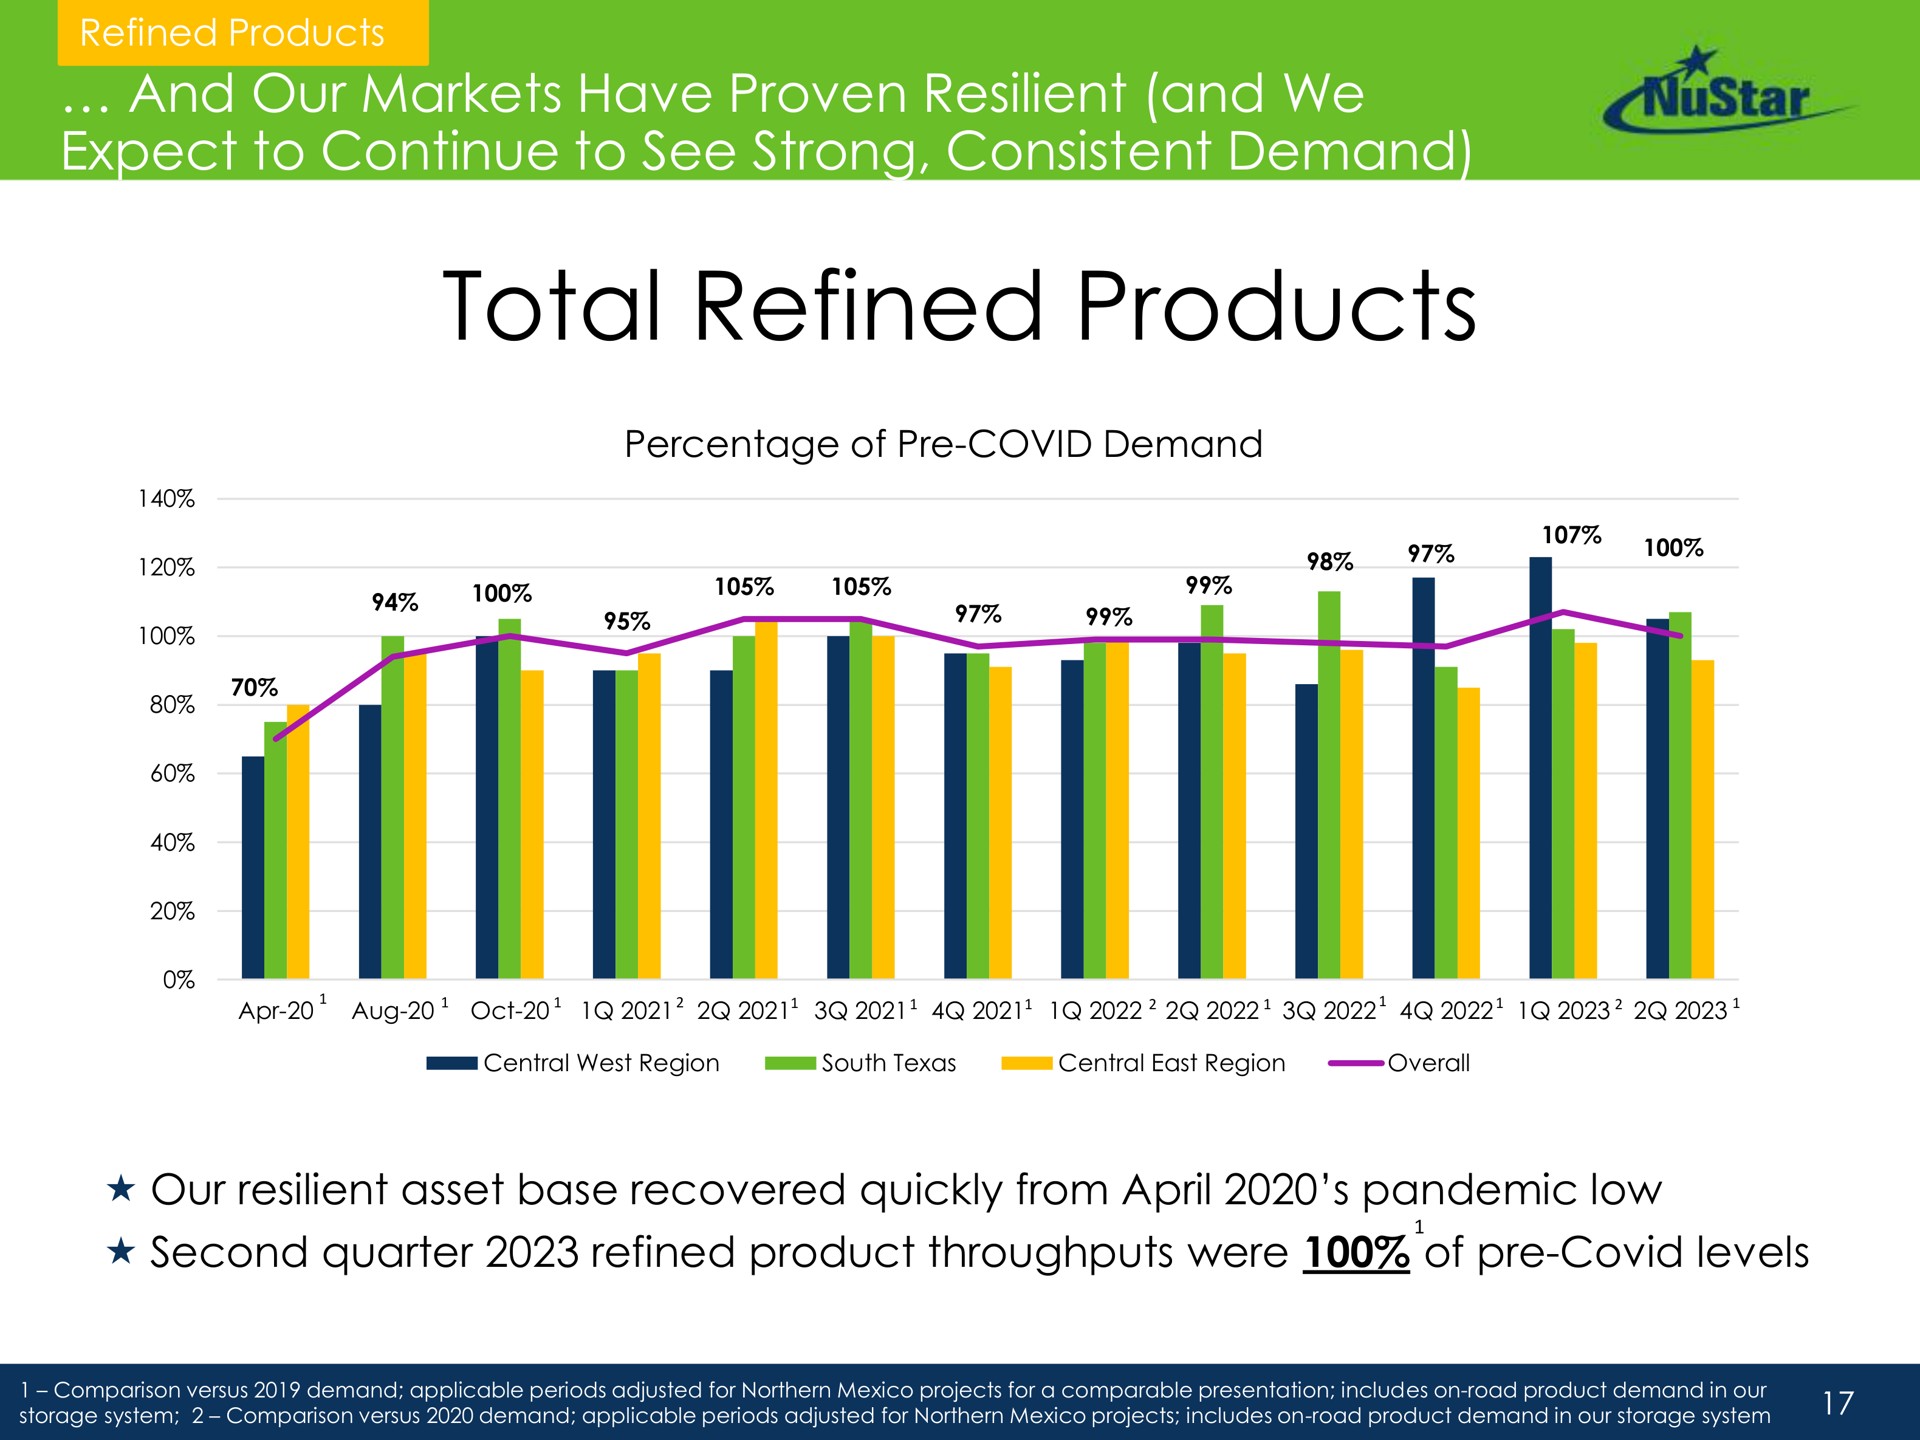 and our markets have proven resilient and we expect to continue to see strong consistent demand total refined products asset base recovered quickly from pandemic low | NuStar Energy